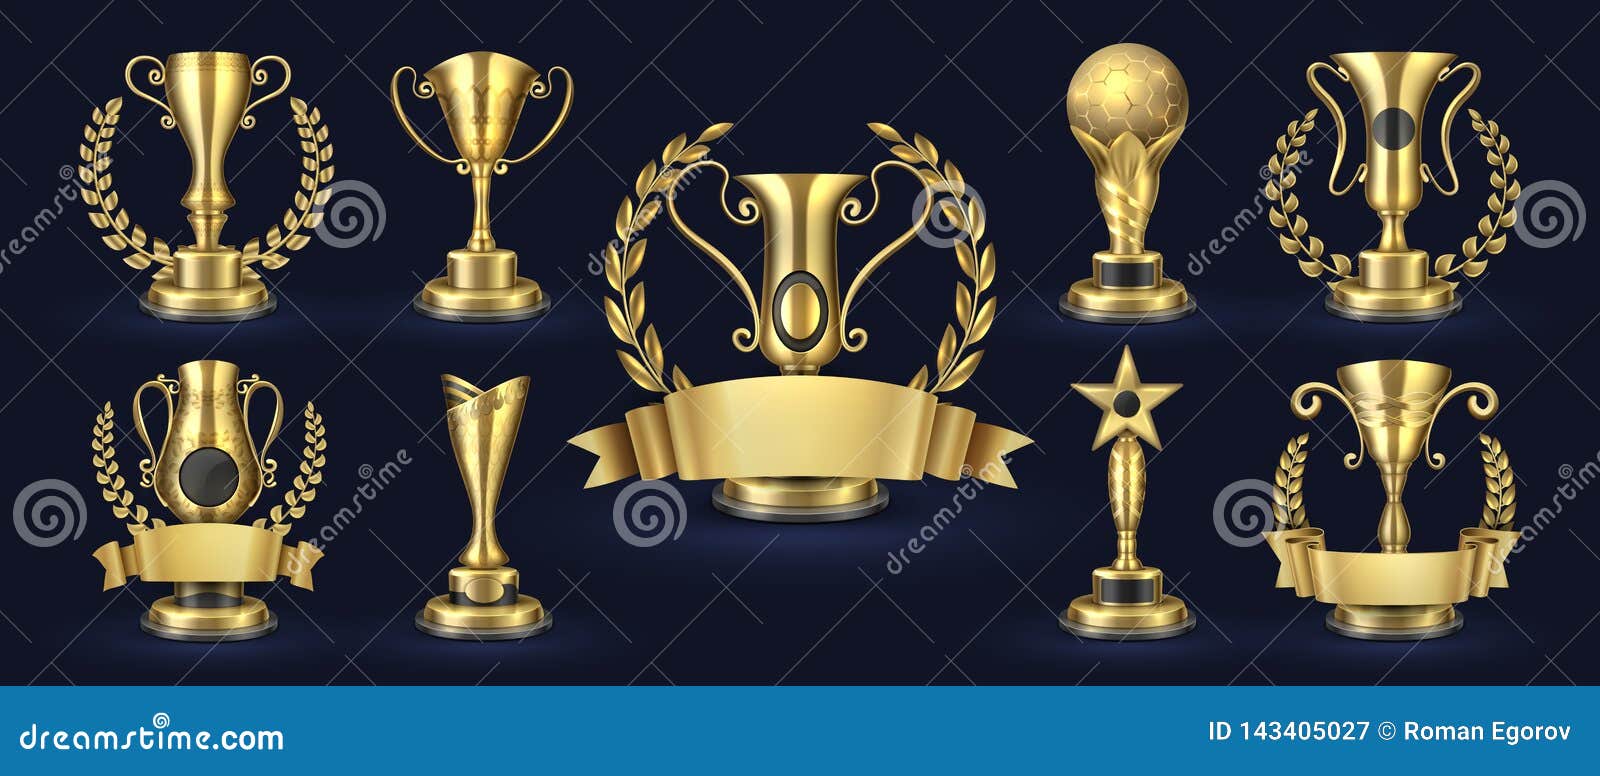 golden trophy. realistic champion award, contest winner prizes with laurel s, 3d awards banner.  golden cup